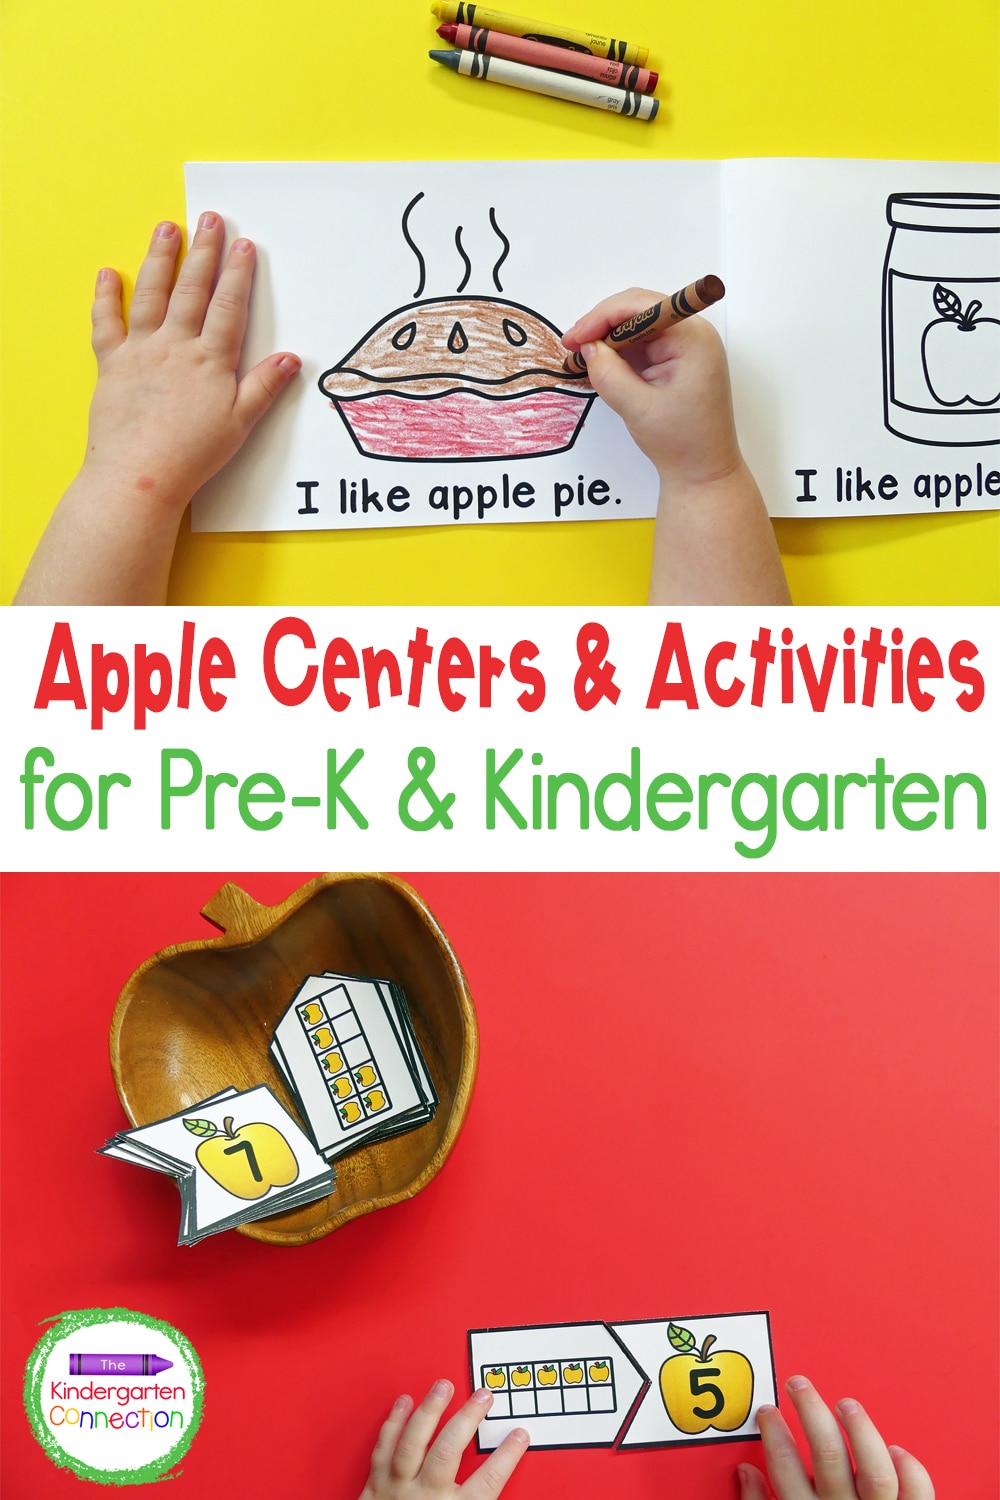 Take your apple theme to the next level with these ready to print and play Apple Centers and Activities for Pre-K & Kindergarten!